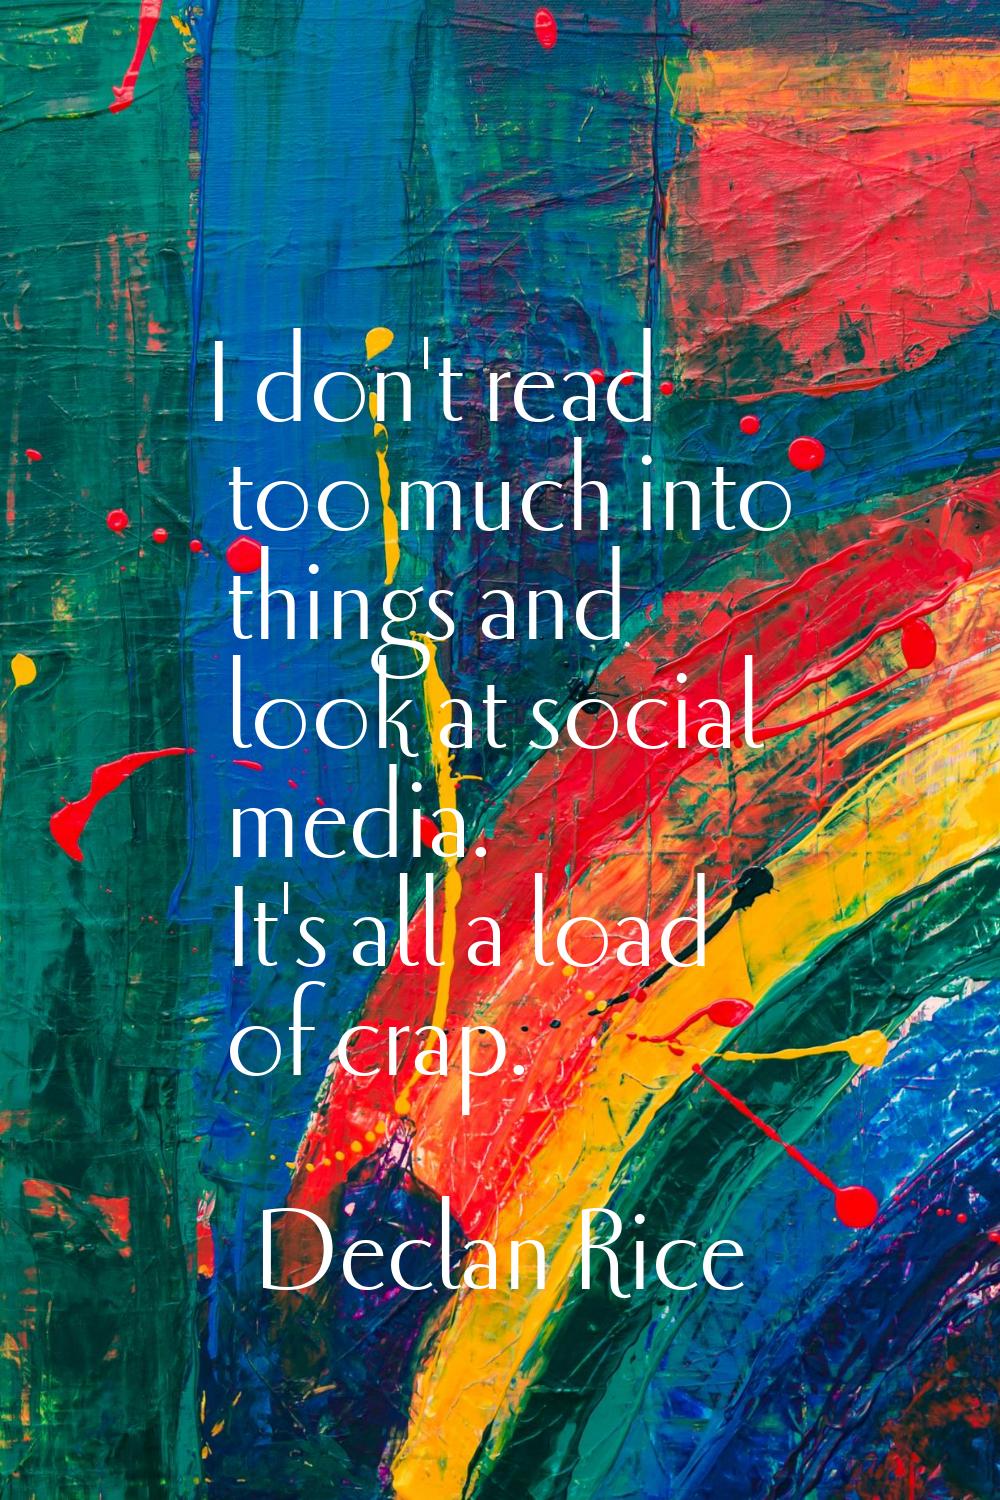 I don't read too much into things and look at social media. It's all a load of crap.